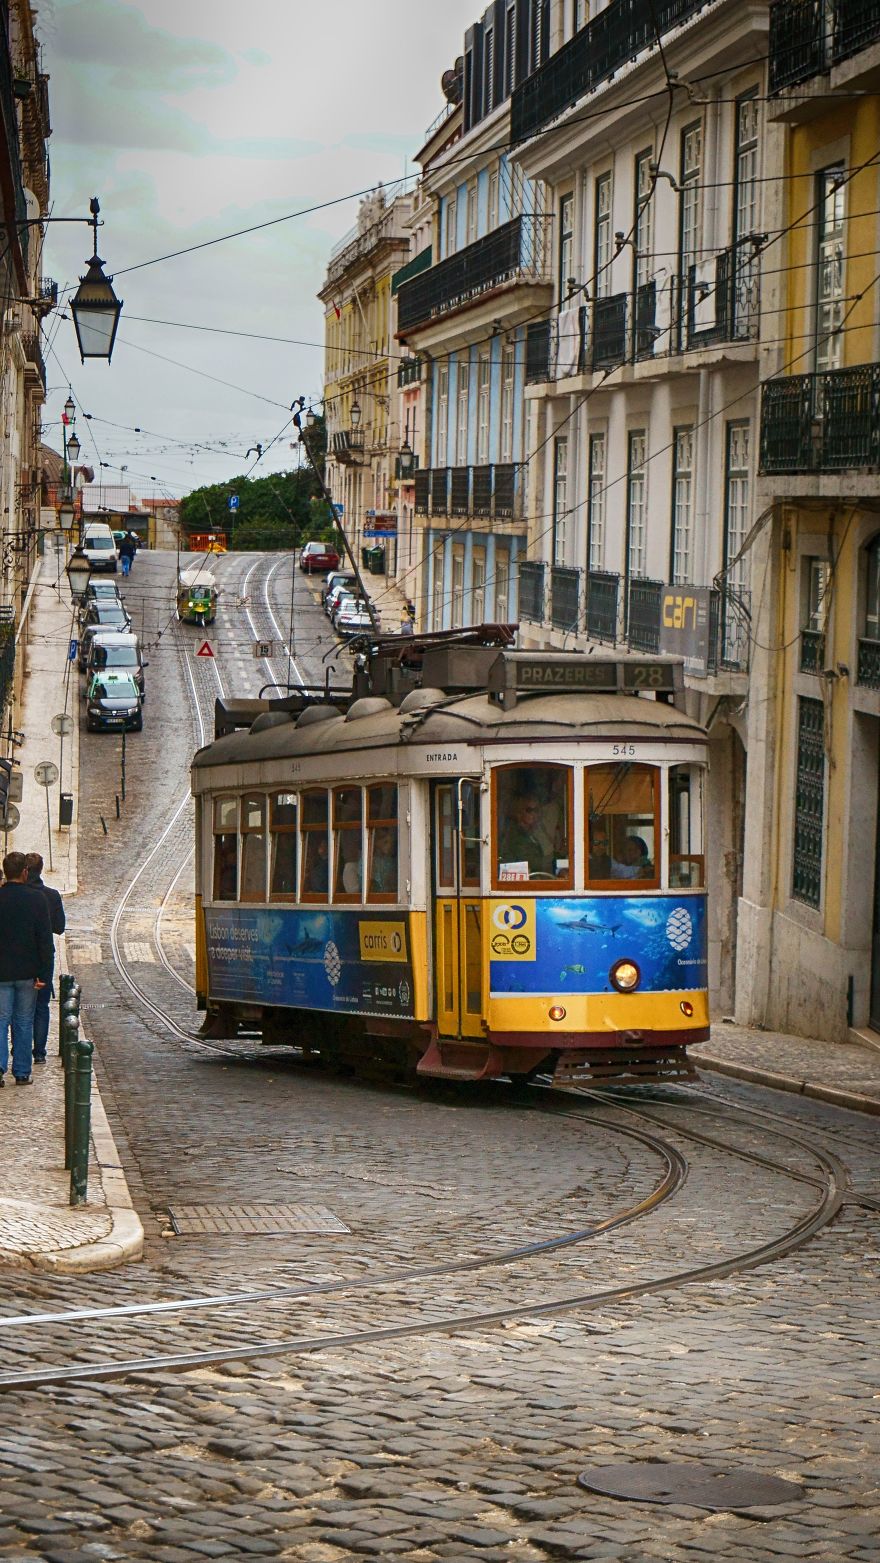 My Tribute To Tram Line 28 In Lisbon